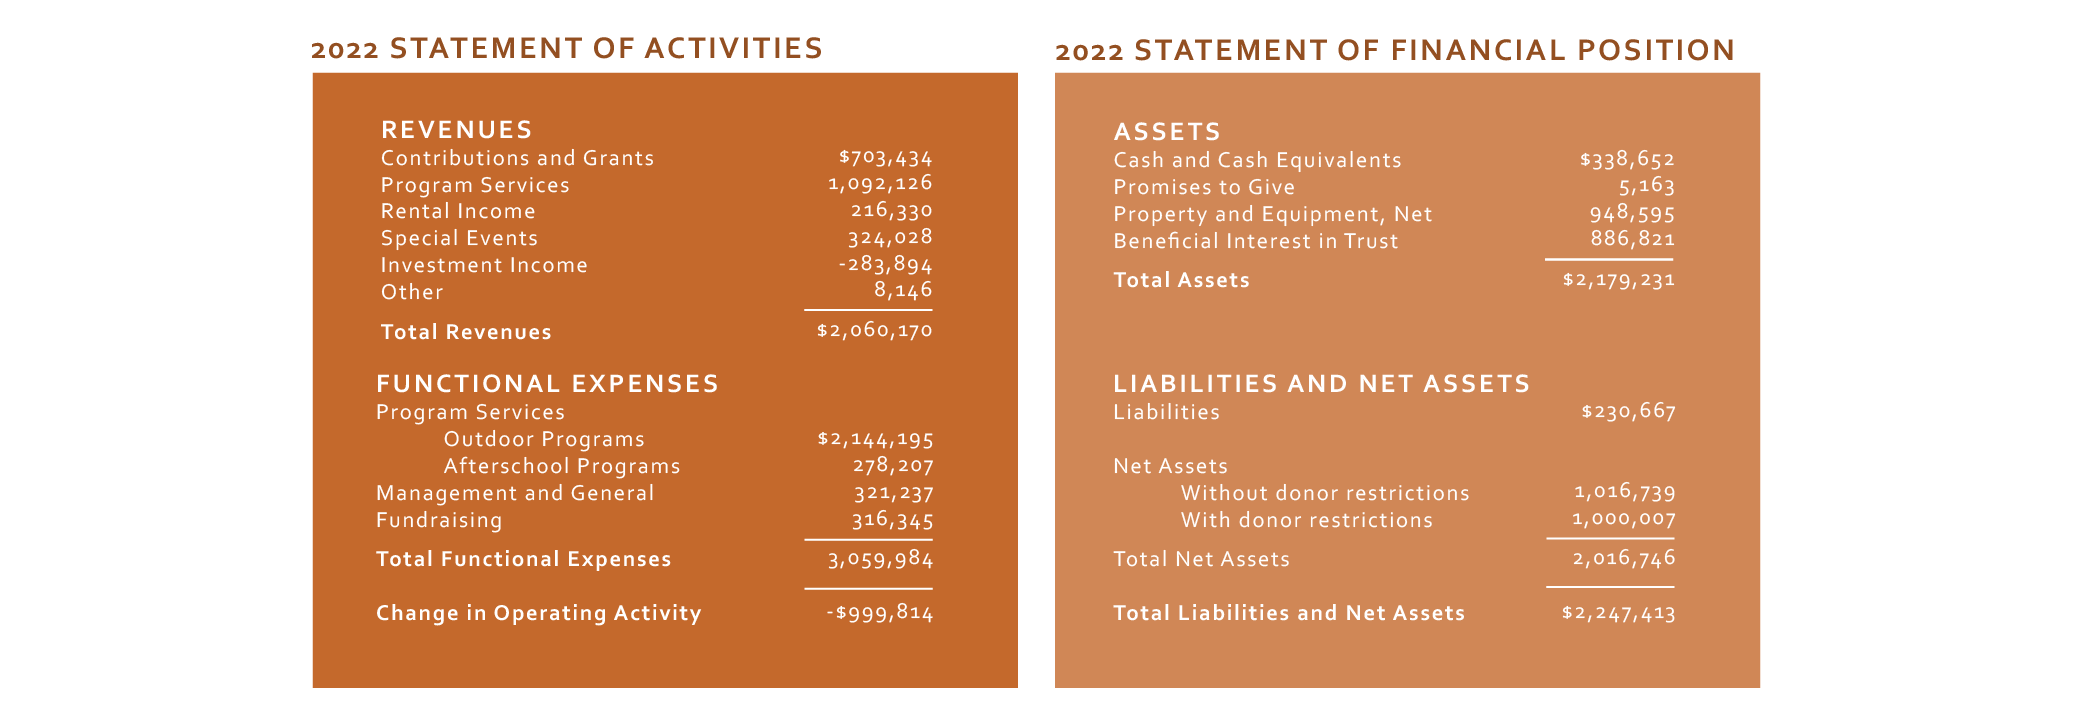 2022 Statement of Activities and Statement of Financial Position.